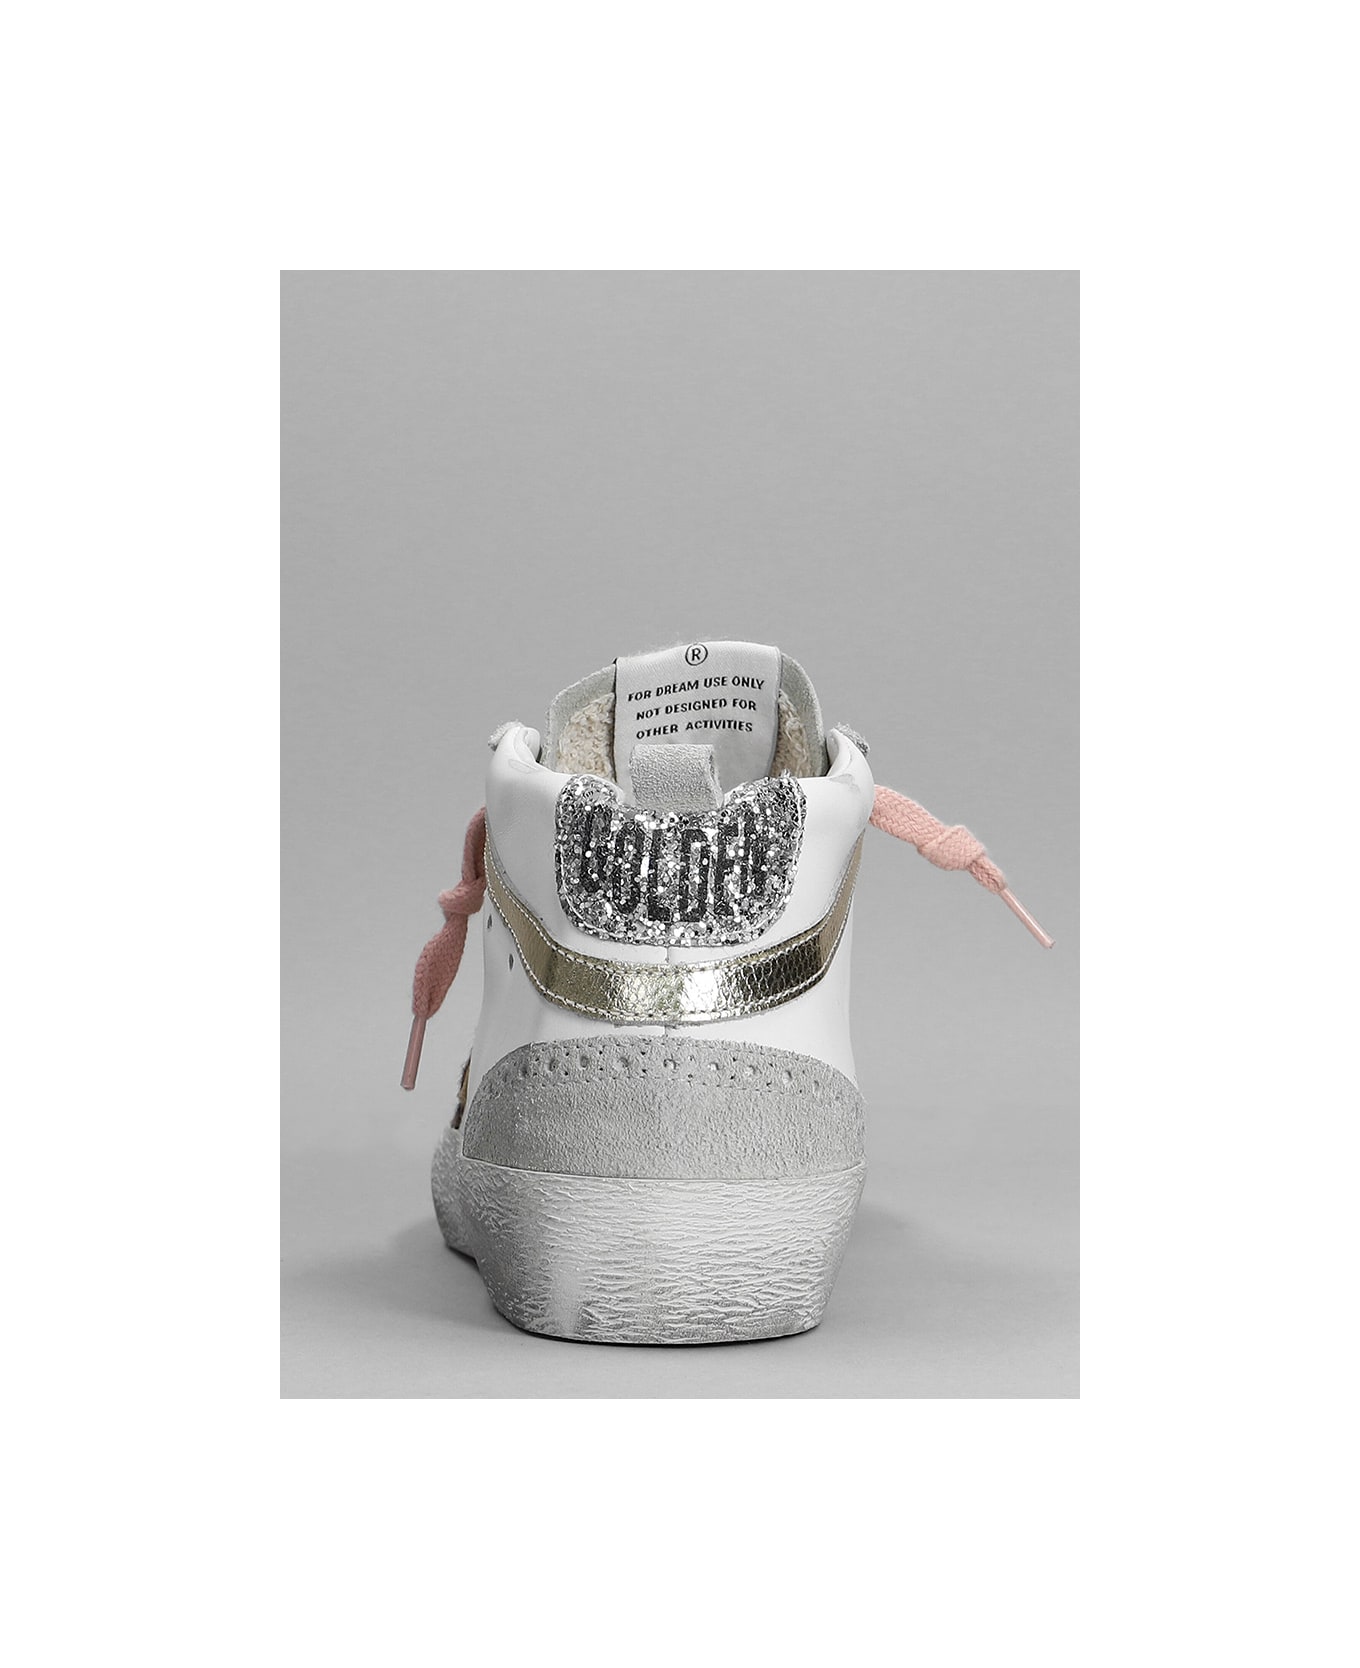 Golden Goose Mid Star Sneakers In White Suede And Leather - Bianco